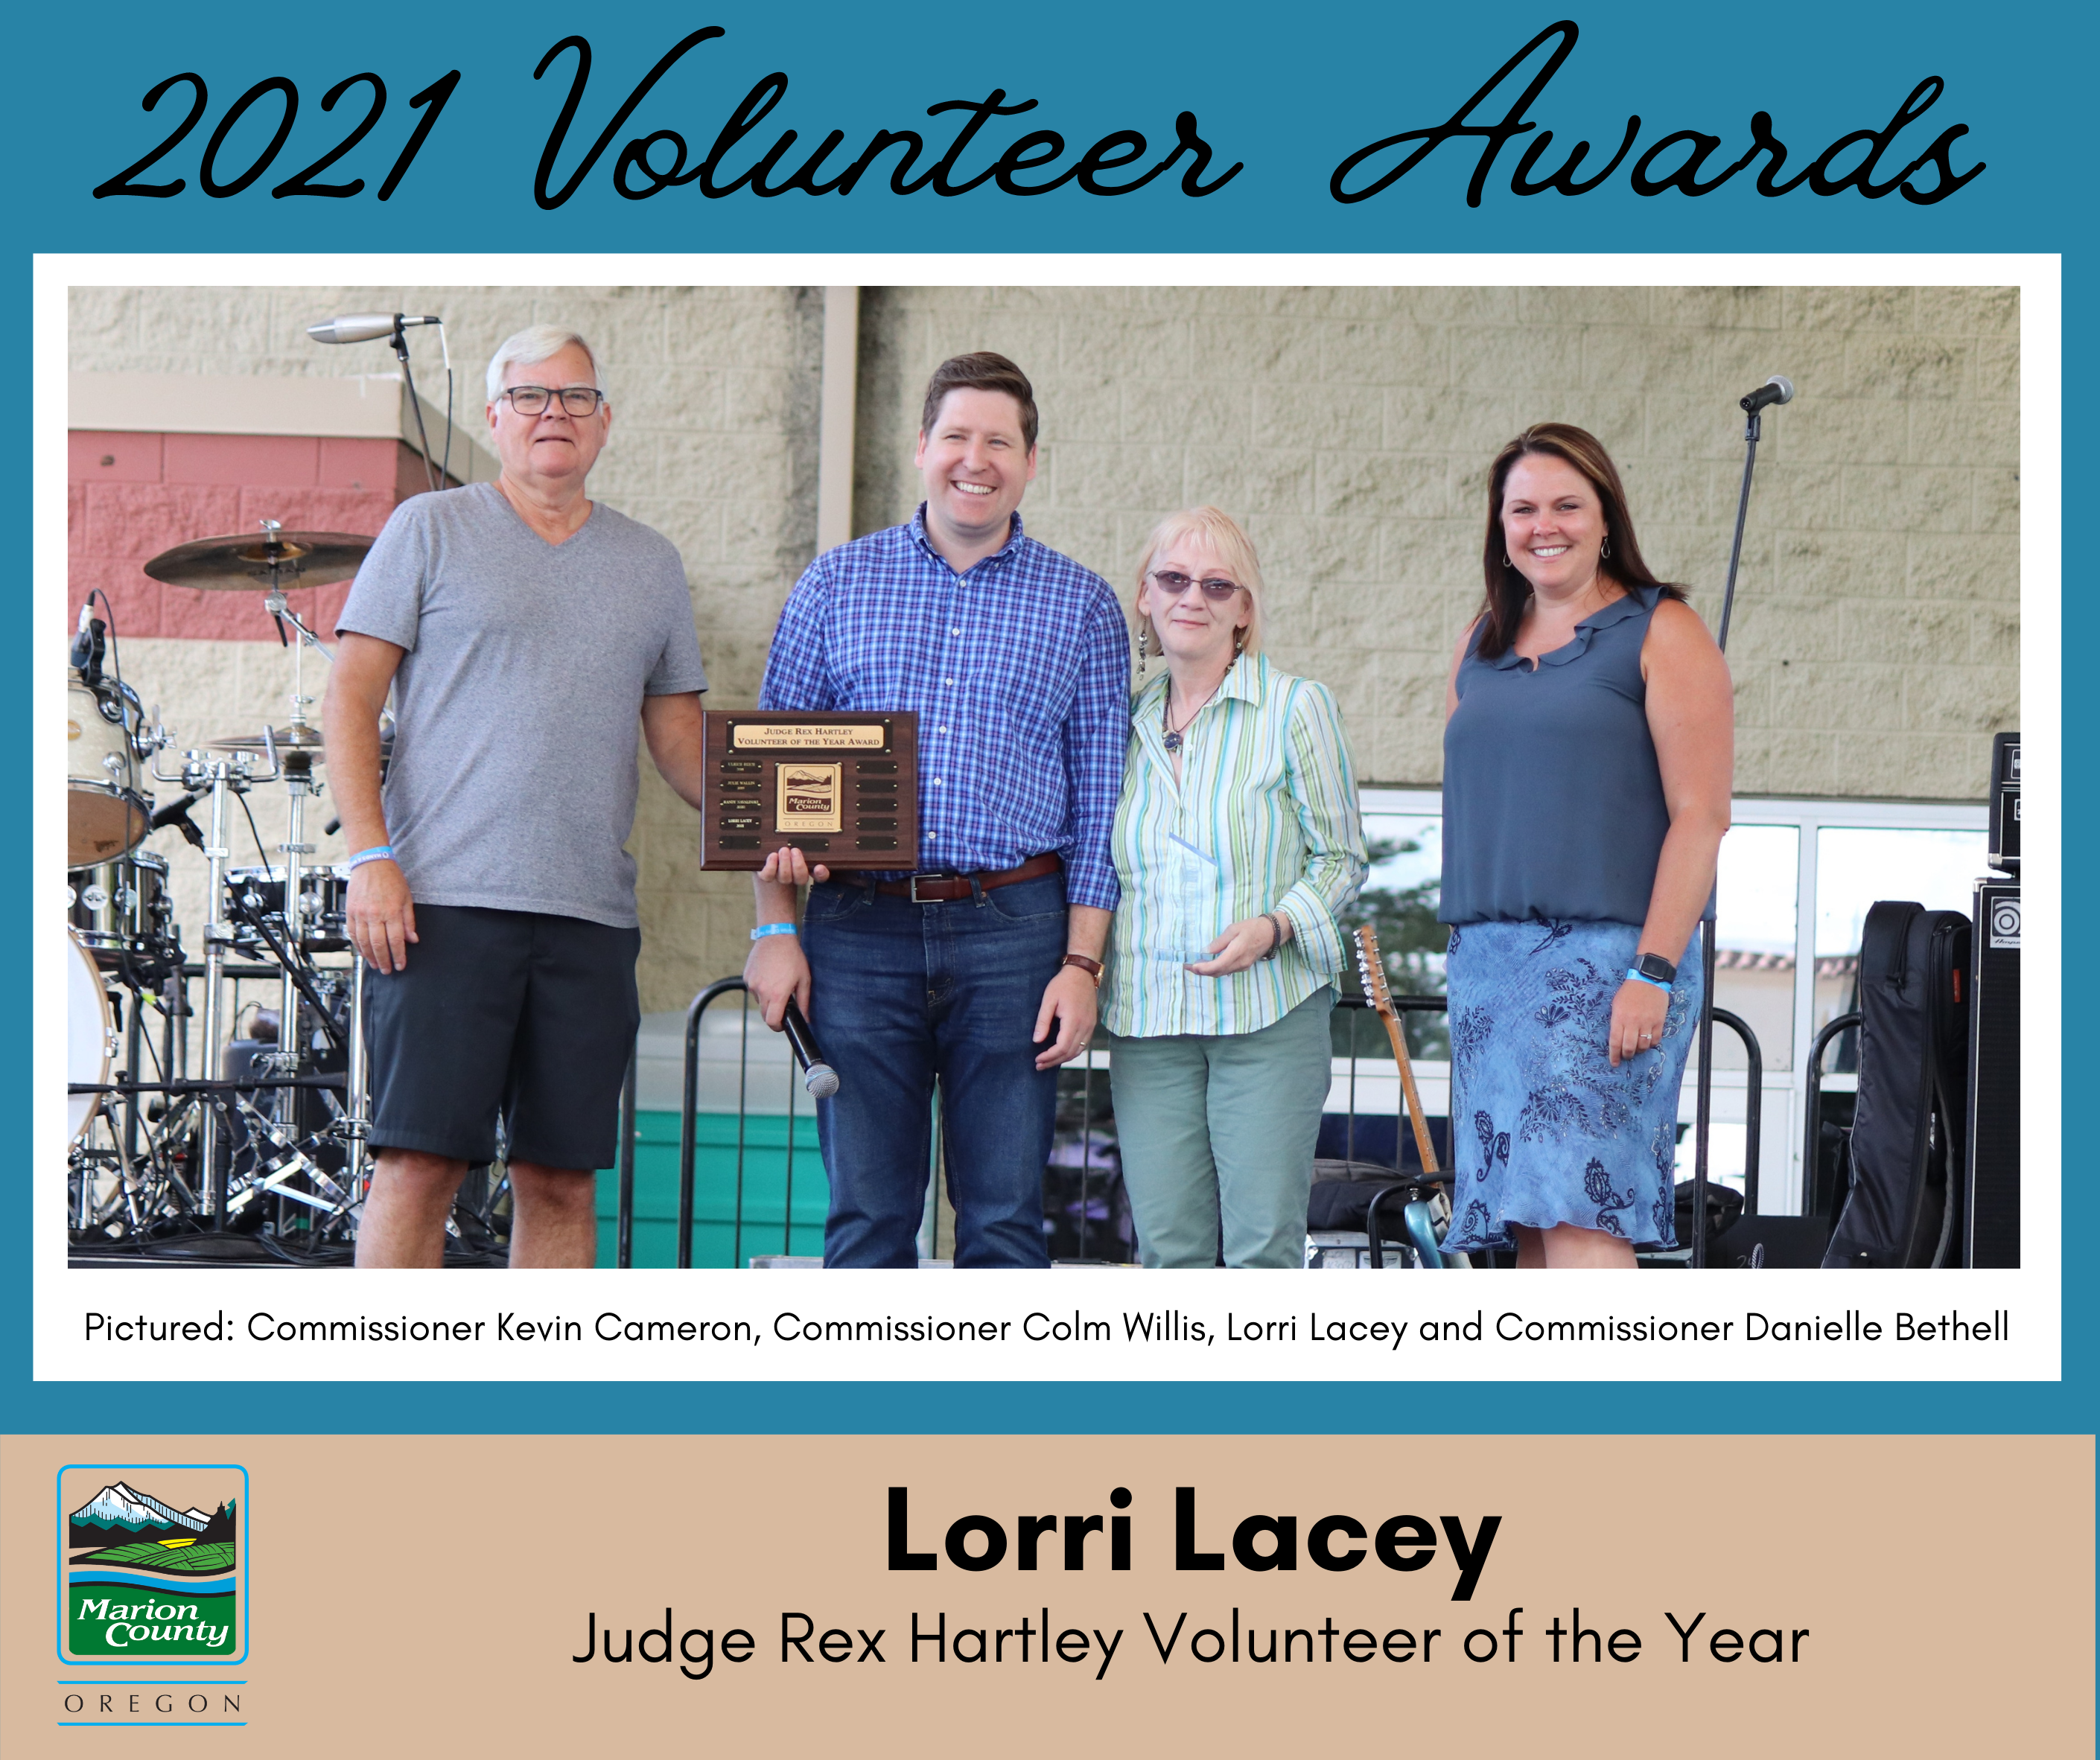 Lorri Lacey Rex Hartley Vol of the Year.png